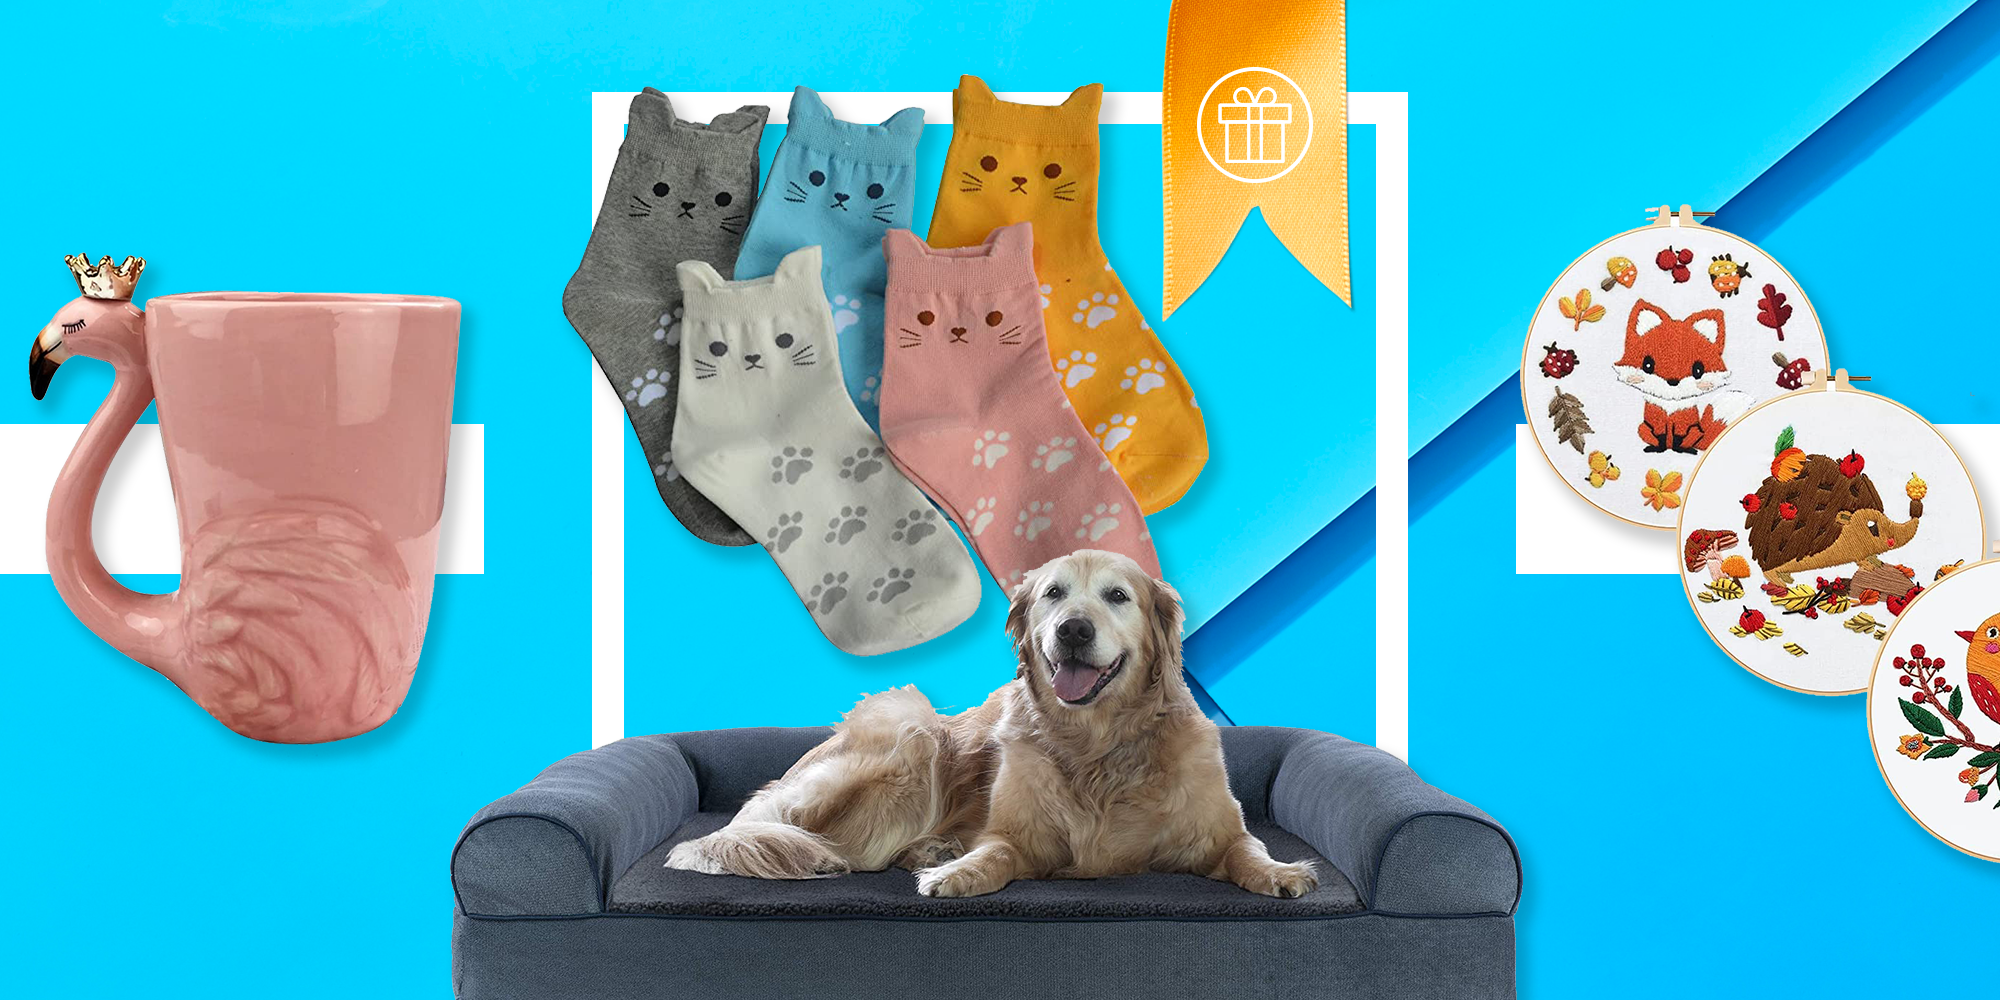 13 Unique Christmas Gifts For Animal Lovers & Their Adorable Furry Friends  » Read Now!